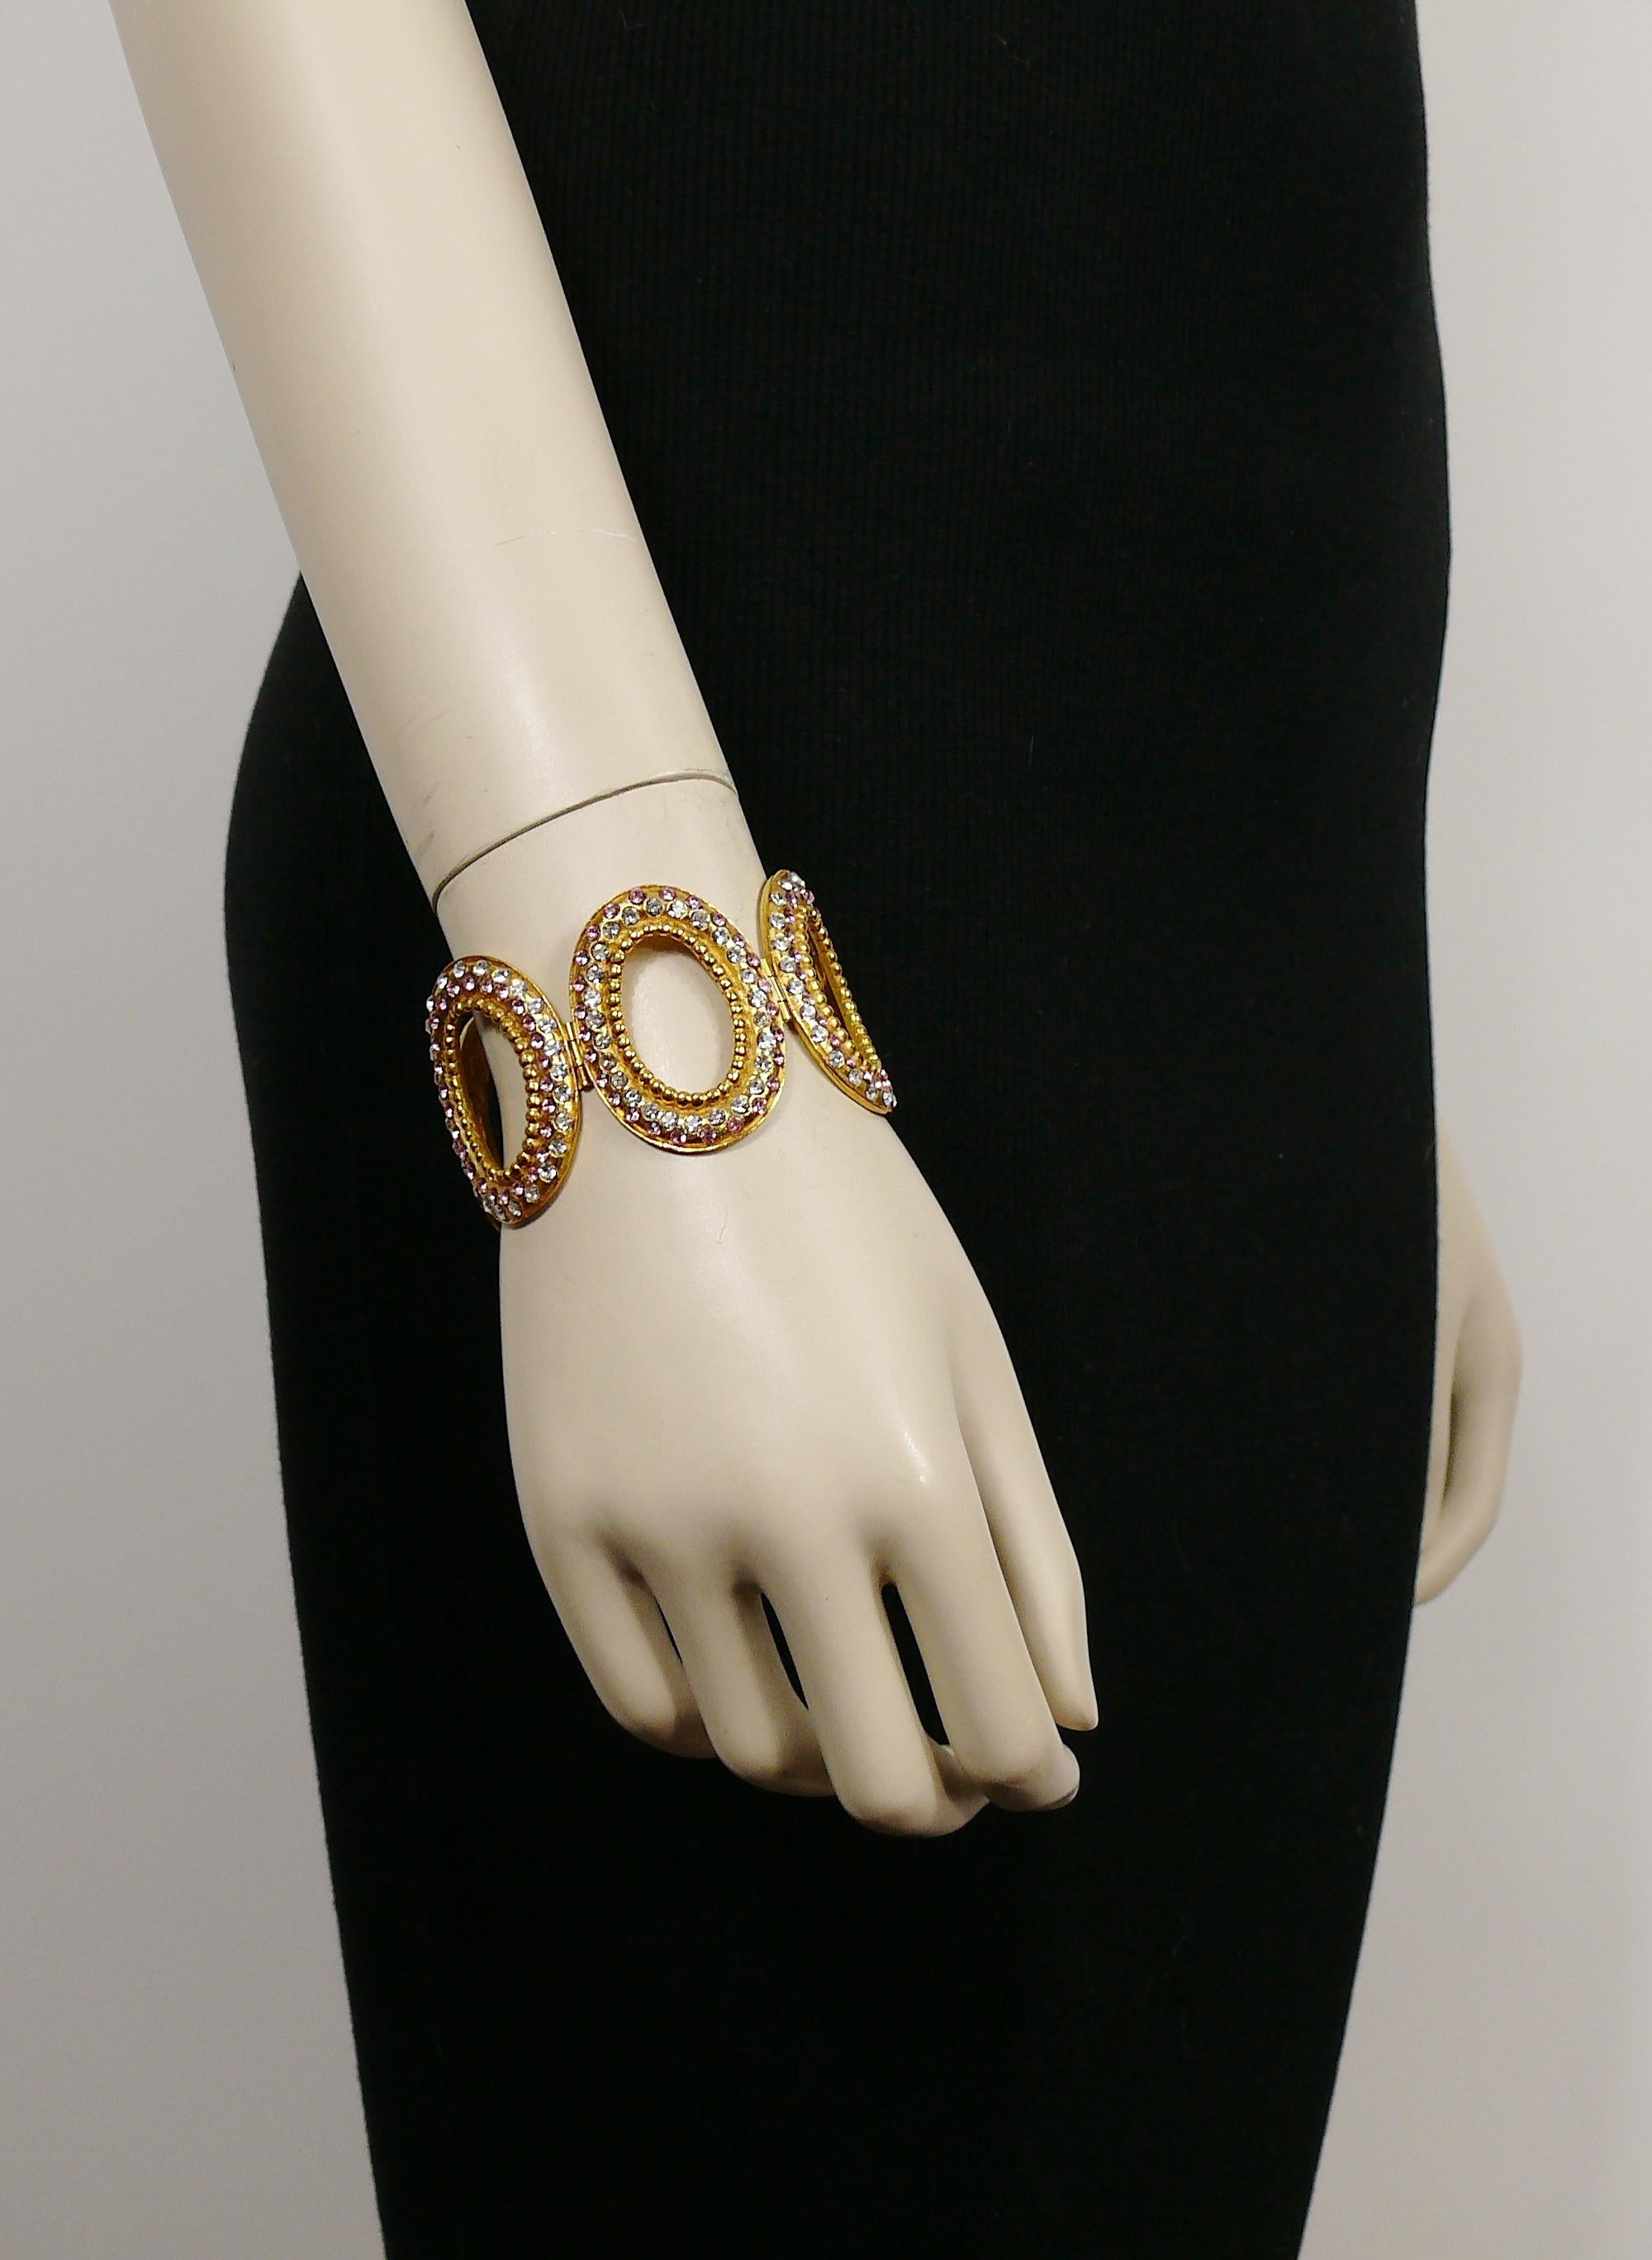 CHRISTIAN DIOR Boutique vintage gold toned oval link bracelet embellished with pink and clear crystals.

Box tab insert closure.

Marked CHRISTIAN DIOR Boutique.

Indicative measurements : length approx. 16 cm (6.30 inches) / link height approx. 4